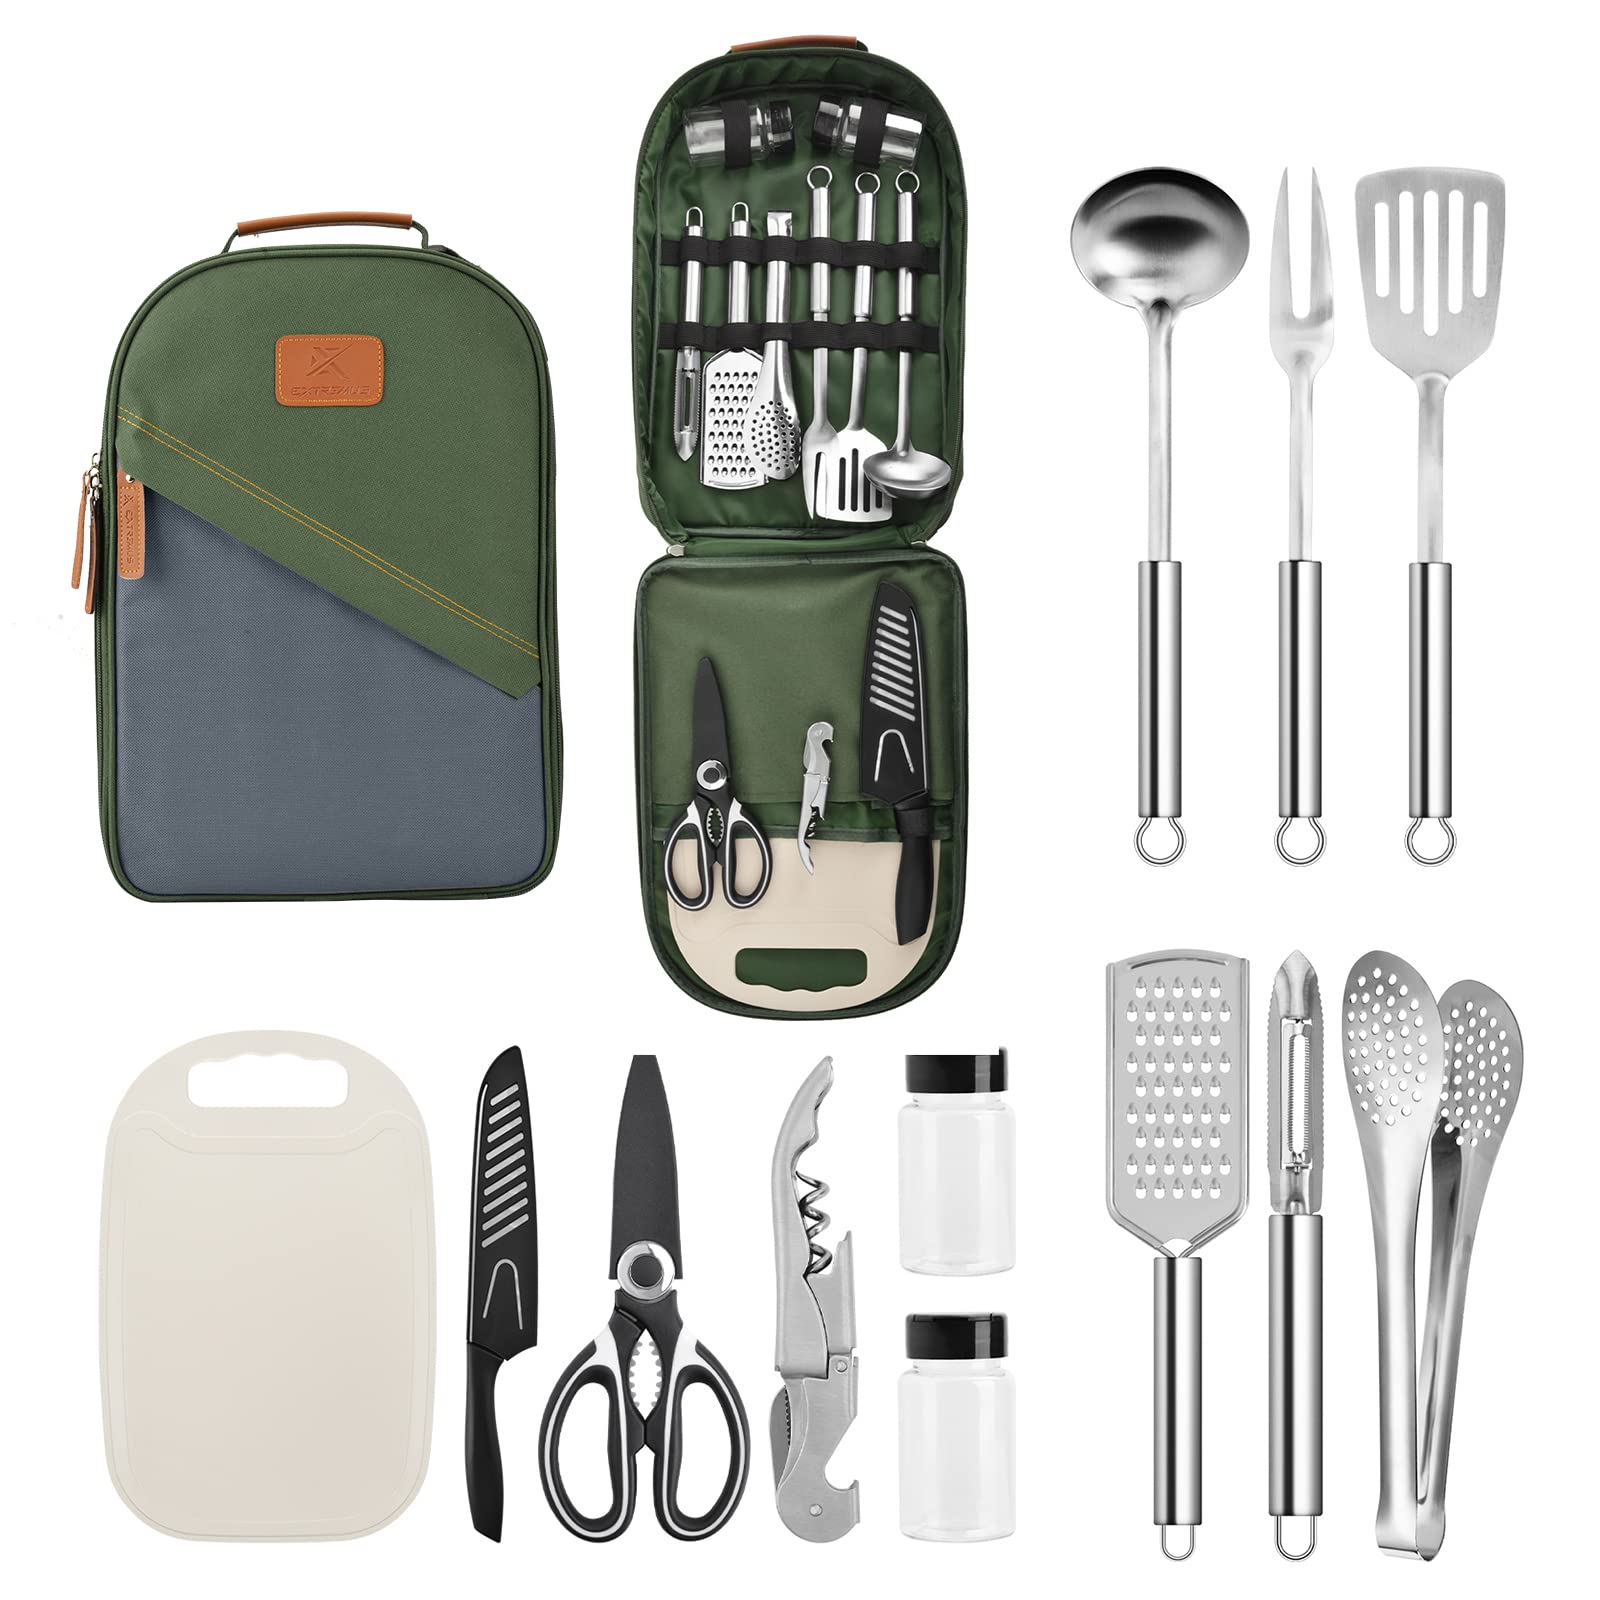 Nineigh Camping Cookware Set, Camping Kitchen Gear, Camp Utensil Set Stainless Steel Grill Tools, Camping Cooking BBQ Equipment Kit for Travel Tent